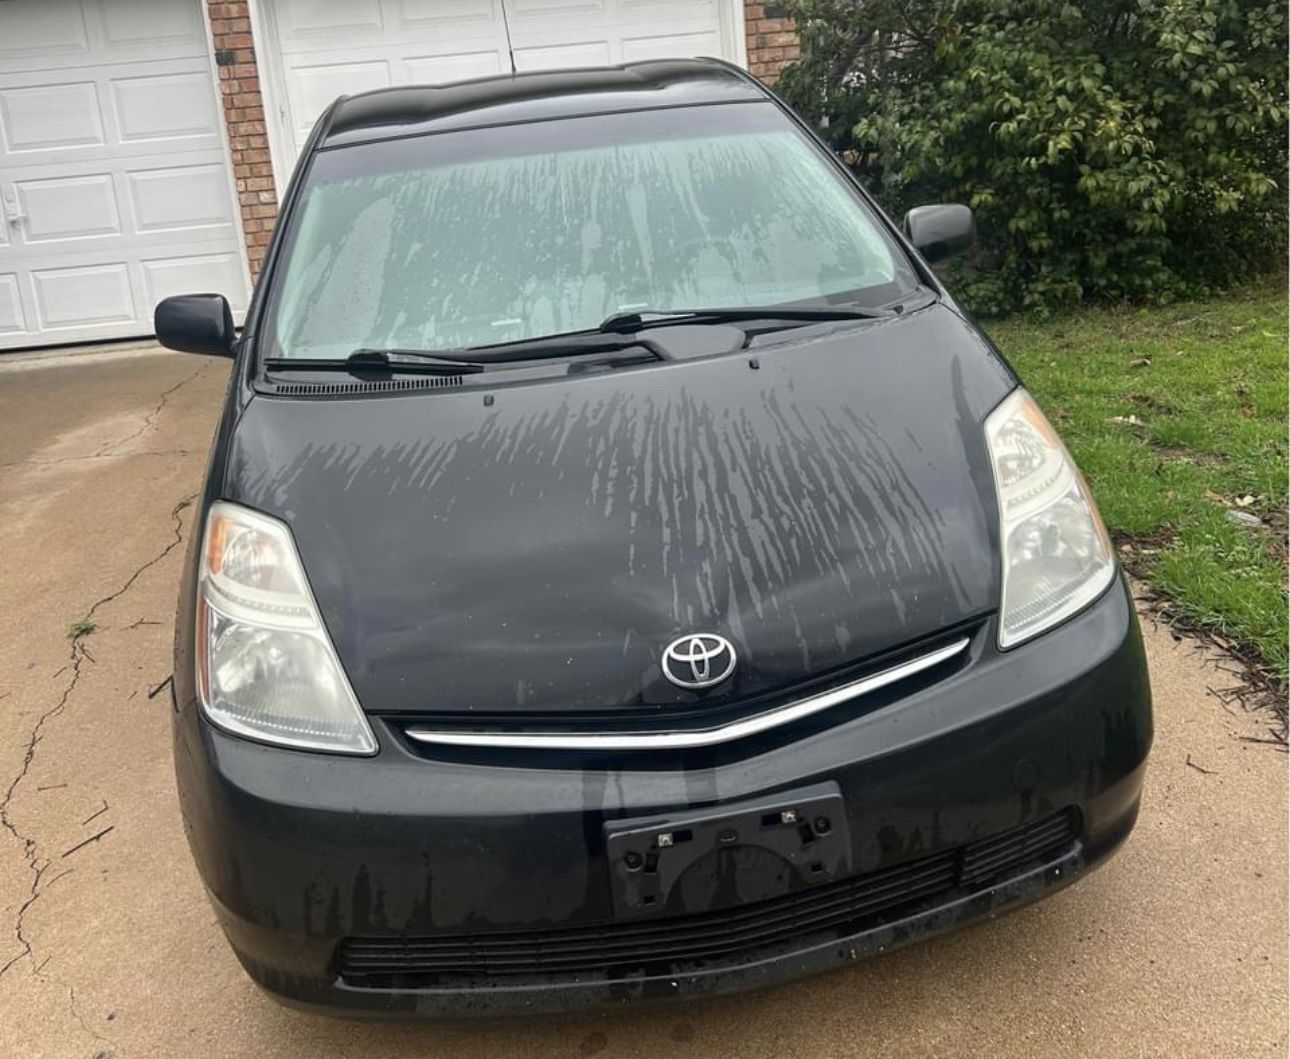 PARTS ONLY FOR SALE 2008 TOYOTA PRIUS HYBRID 